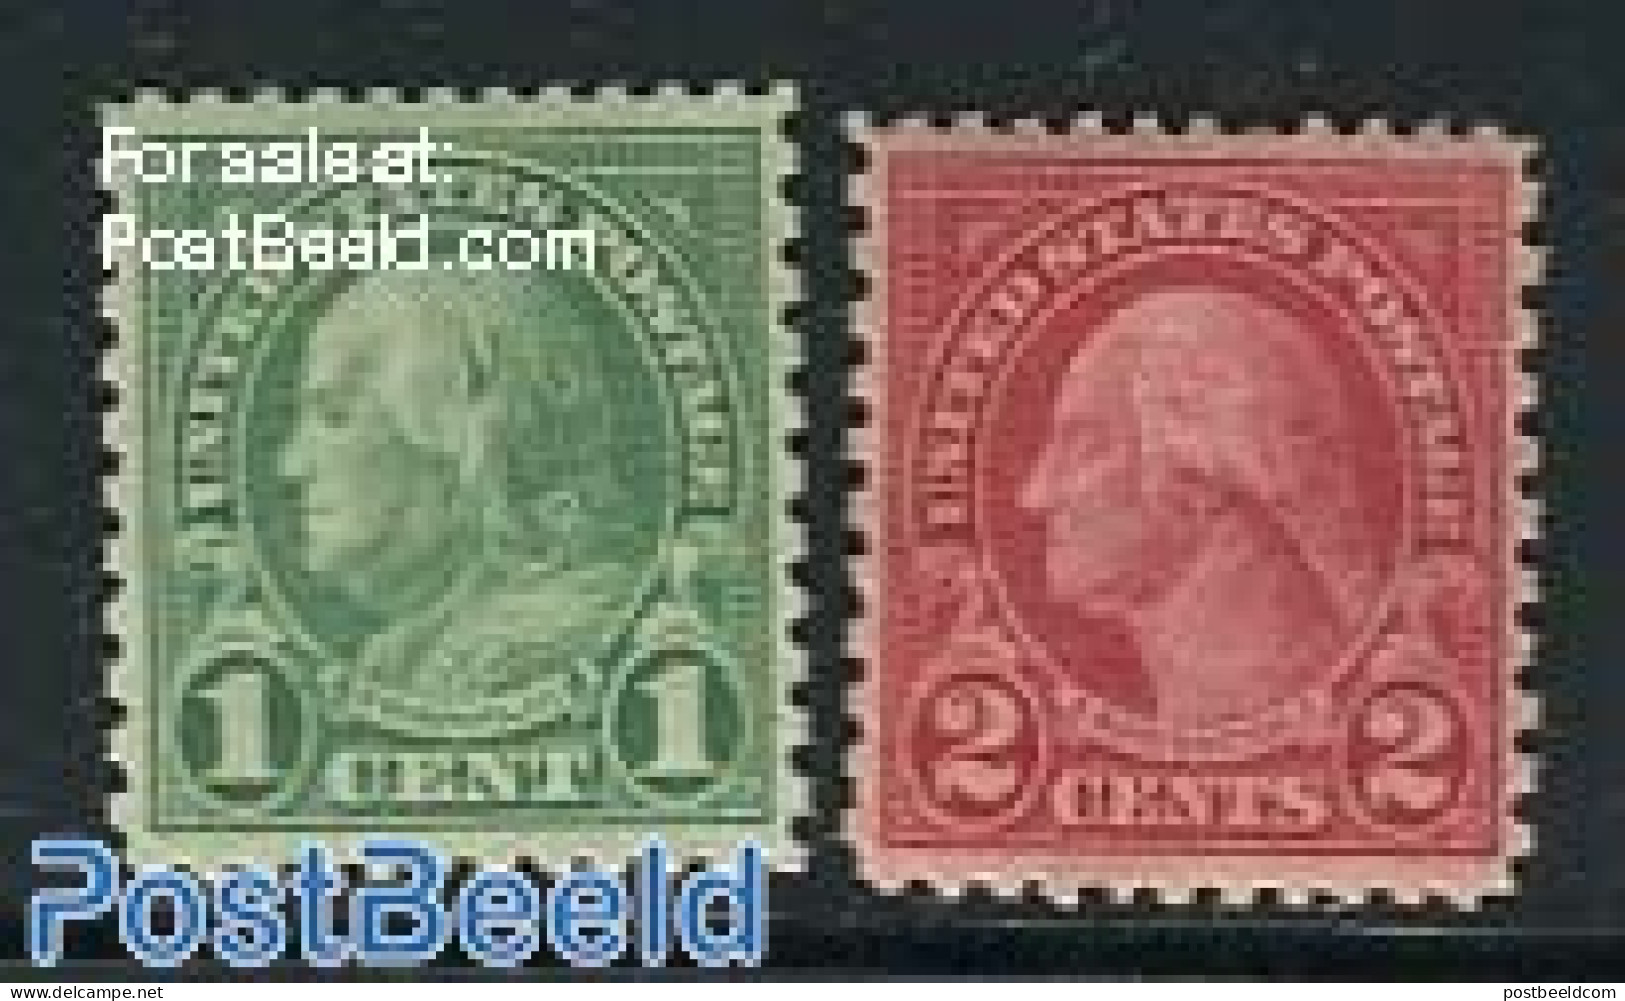 United States Of America 1922 Definitives 2v, Perf. 11:10, Mint NH - Ungebraucht